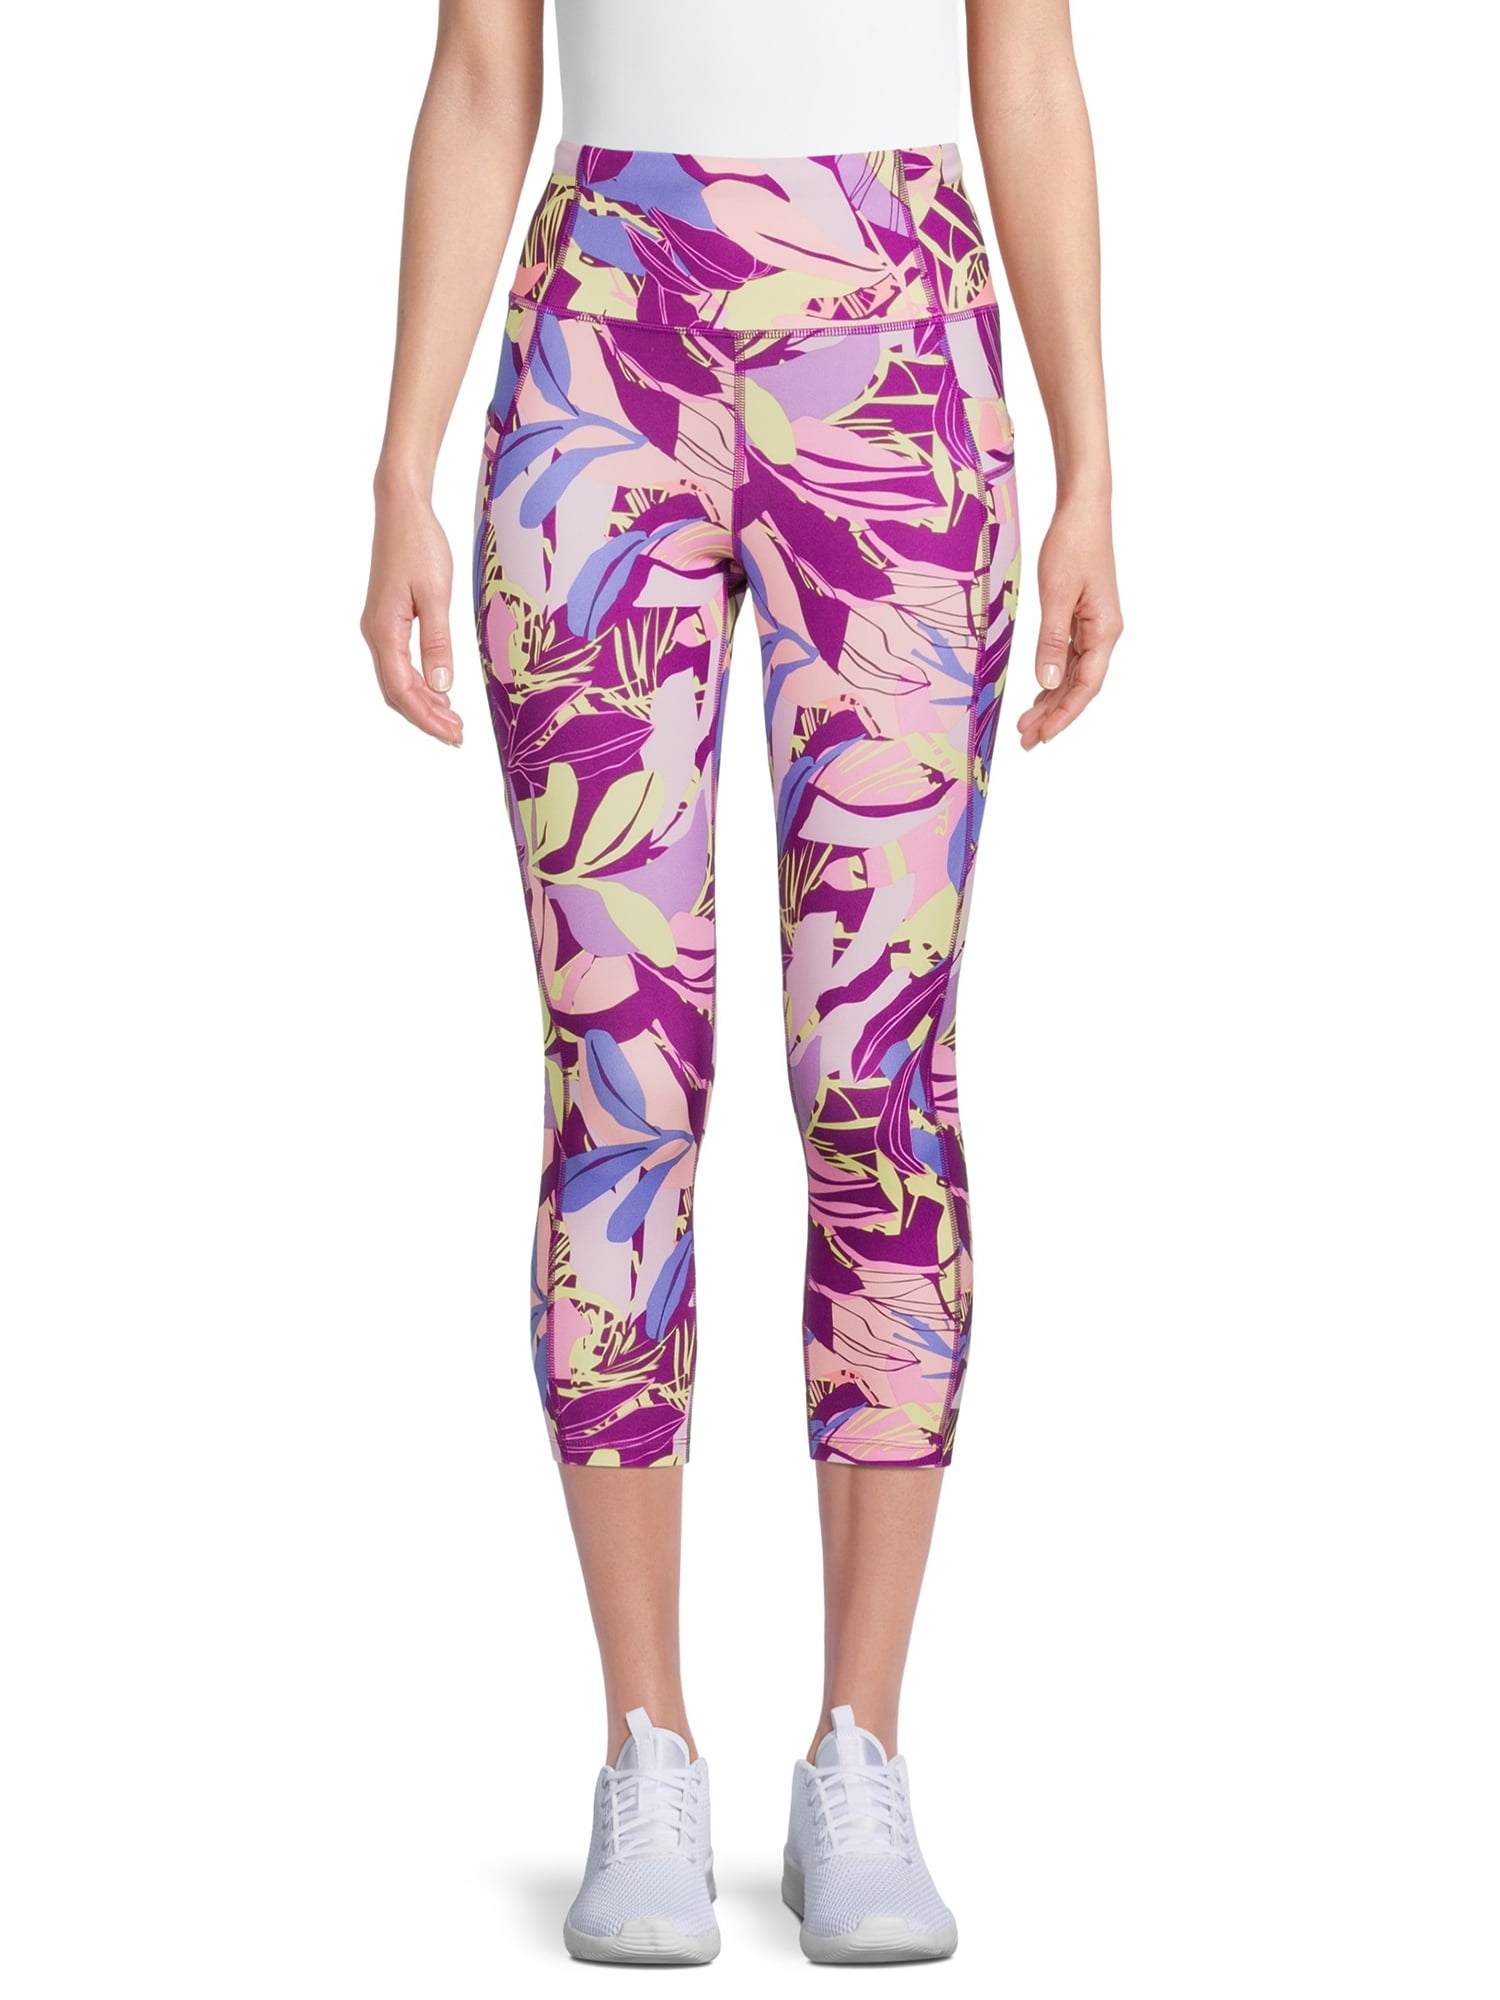 Avia Womens Core Performance Multi Floral Leggings New With Tags X